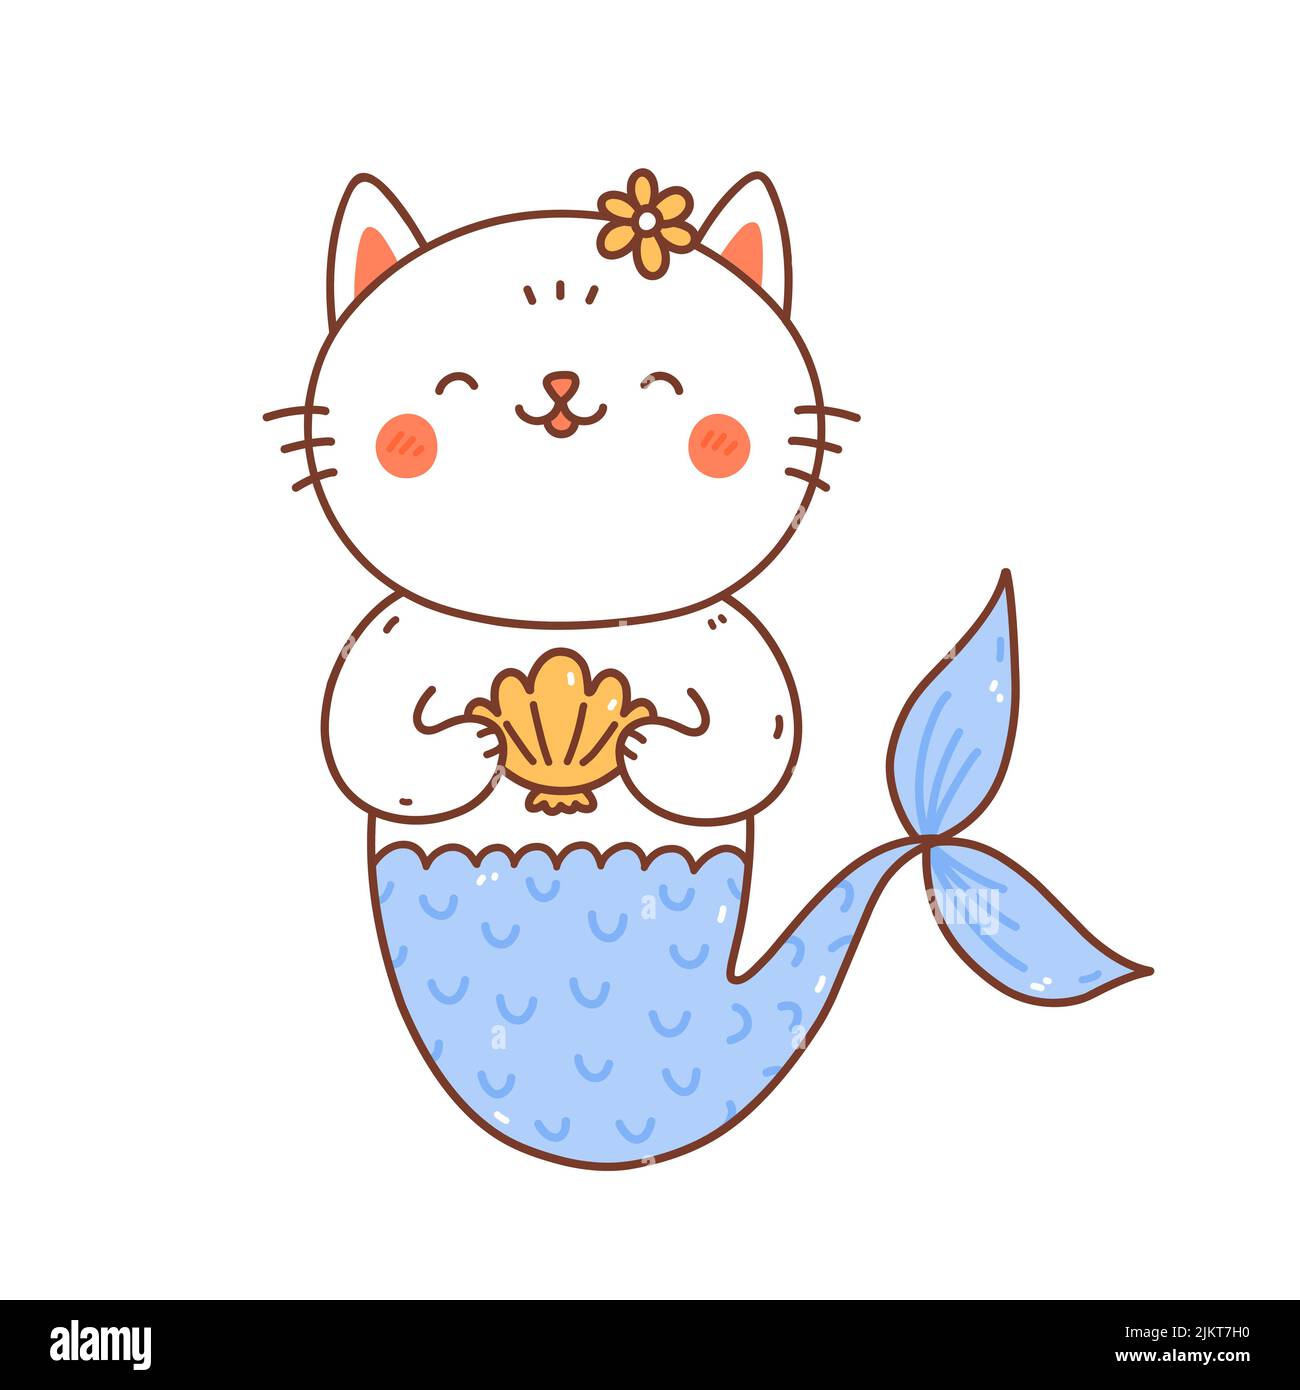 Cute smiling mermaid cat isolated on white background. Vector hand-drawn illustration in kawaii style. Perfect for cards, print, t-shirt, poster, deco Stock Vector